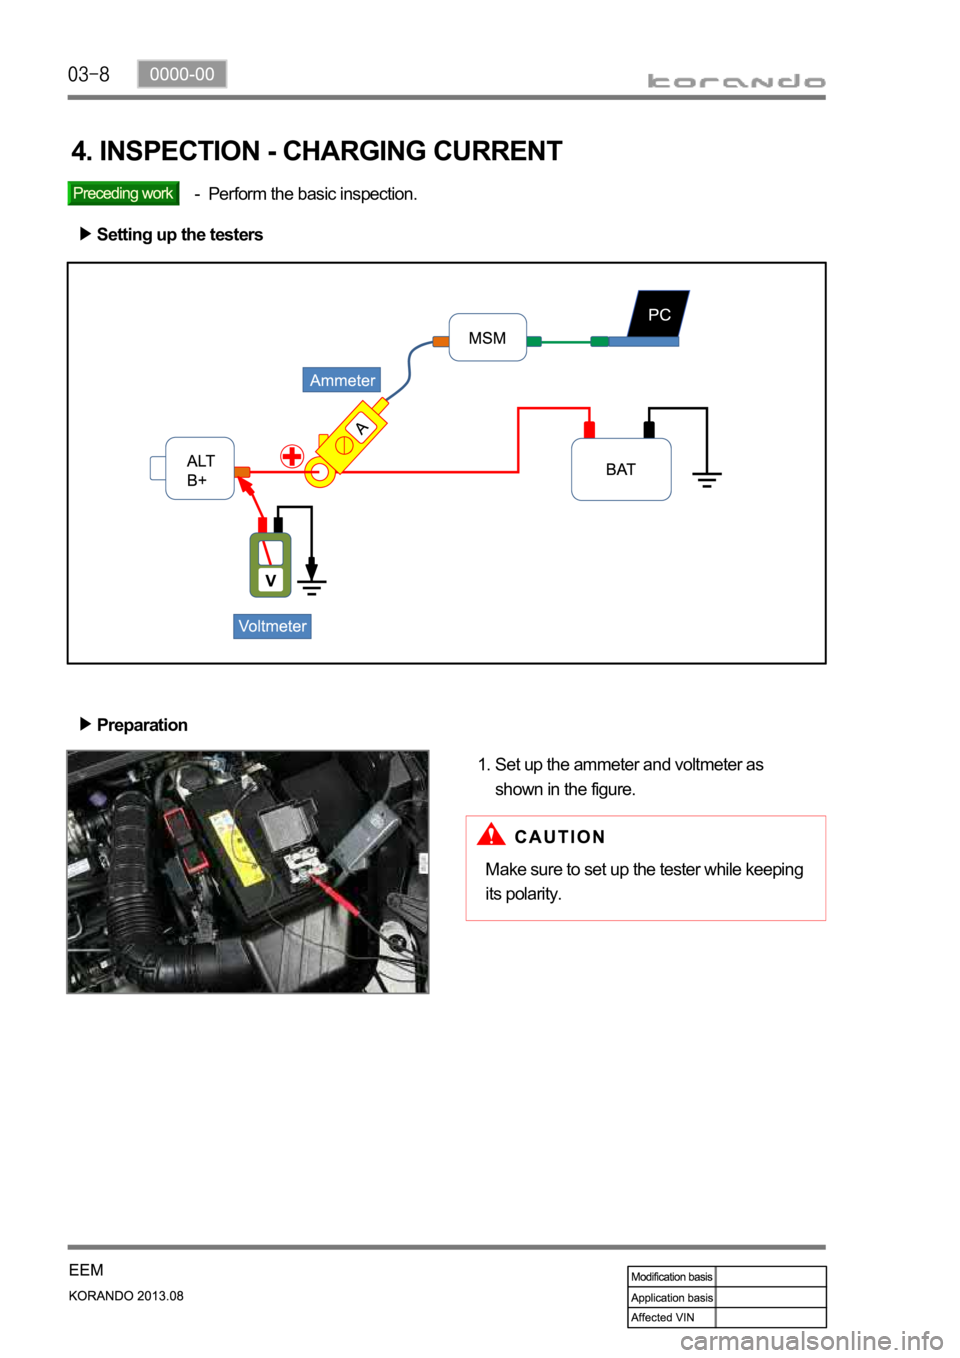 SSANGYONG KORANDO 2013  Service Manual 4. INSPECTION - CHARGING CURRENT
Perform the basic inspection. -
Setting up the testers
Preparation
Set up the ammeter and voltmeter as 
shown in the figure. 1.
Make sure to set up the tester while ke